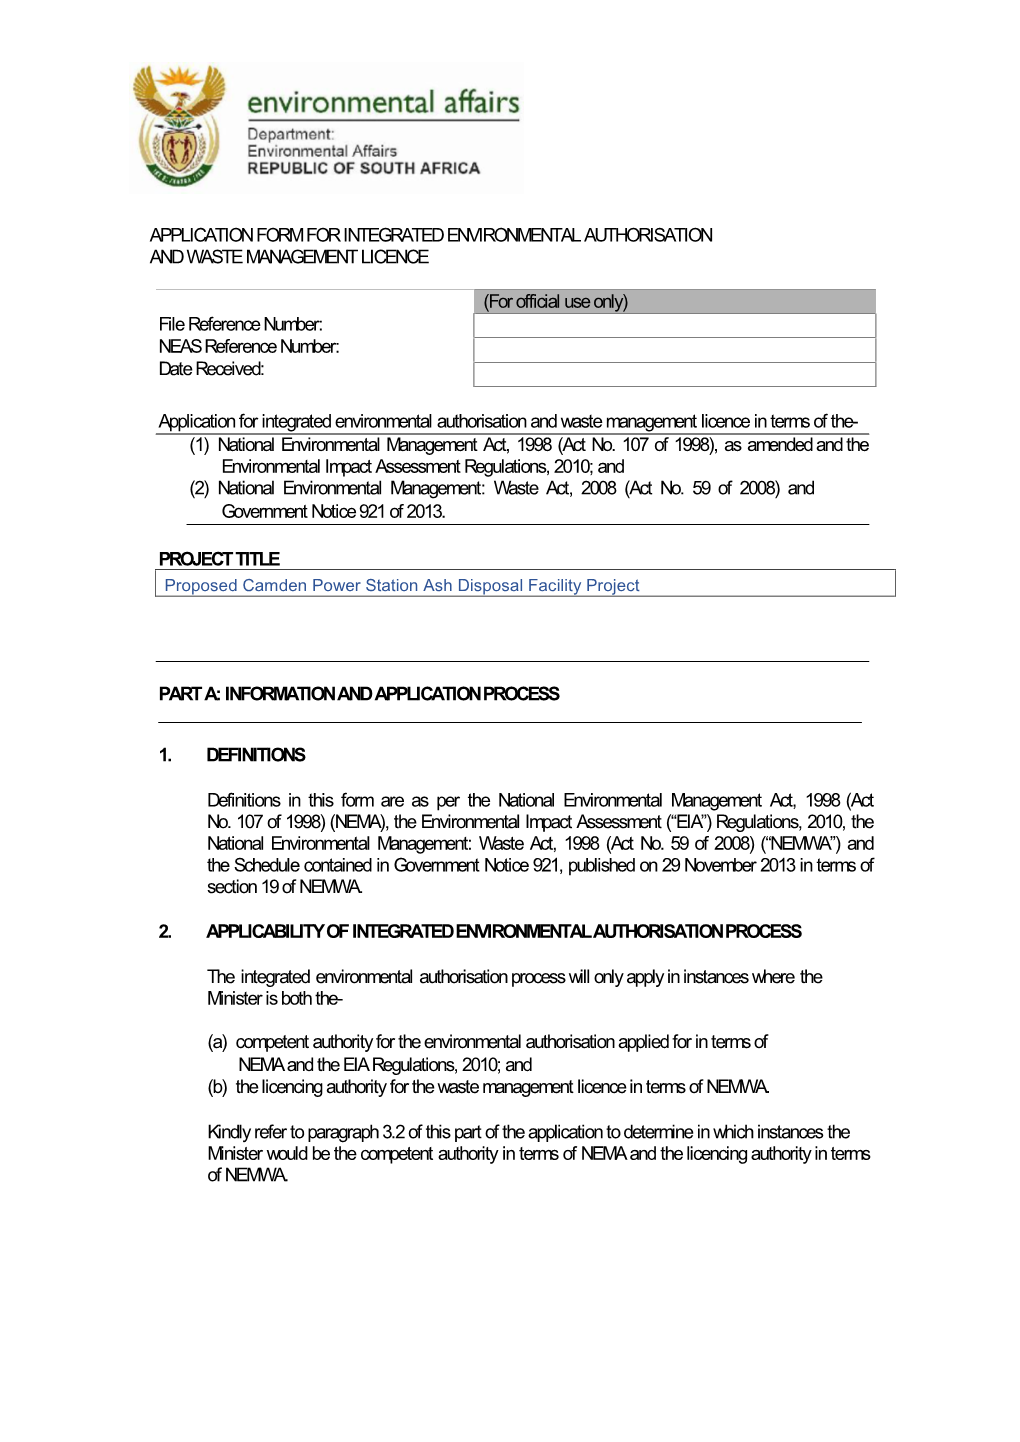 Application Form for Integrated Environmental Authorisation and Waste Management Licence